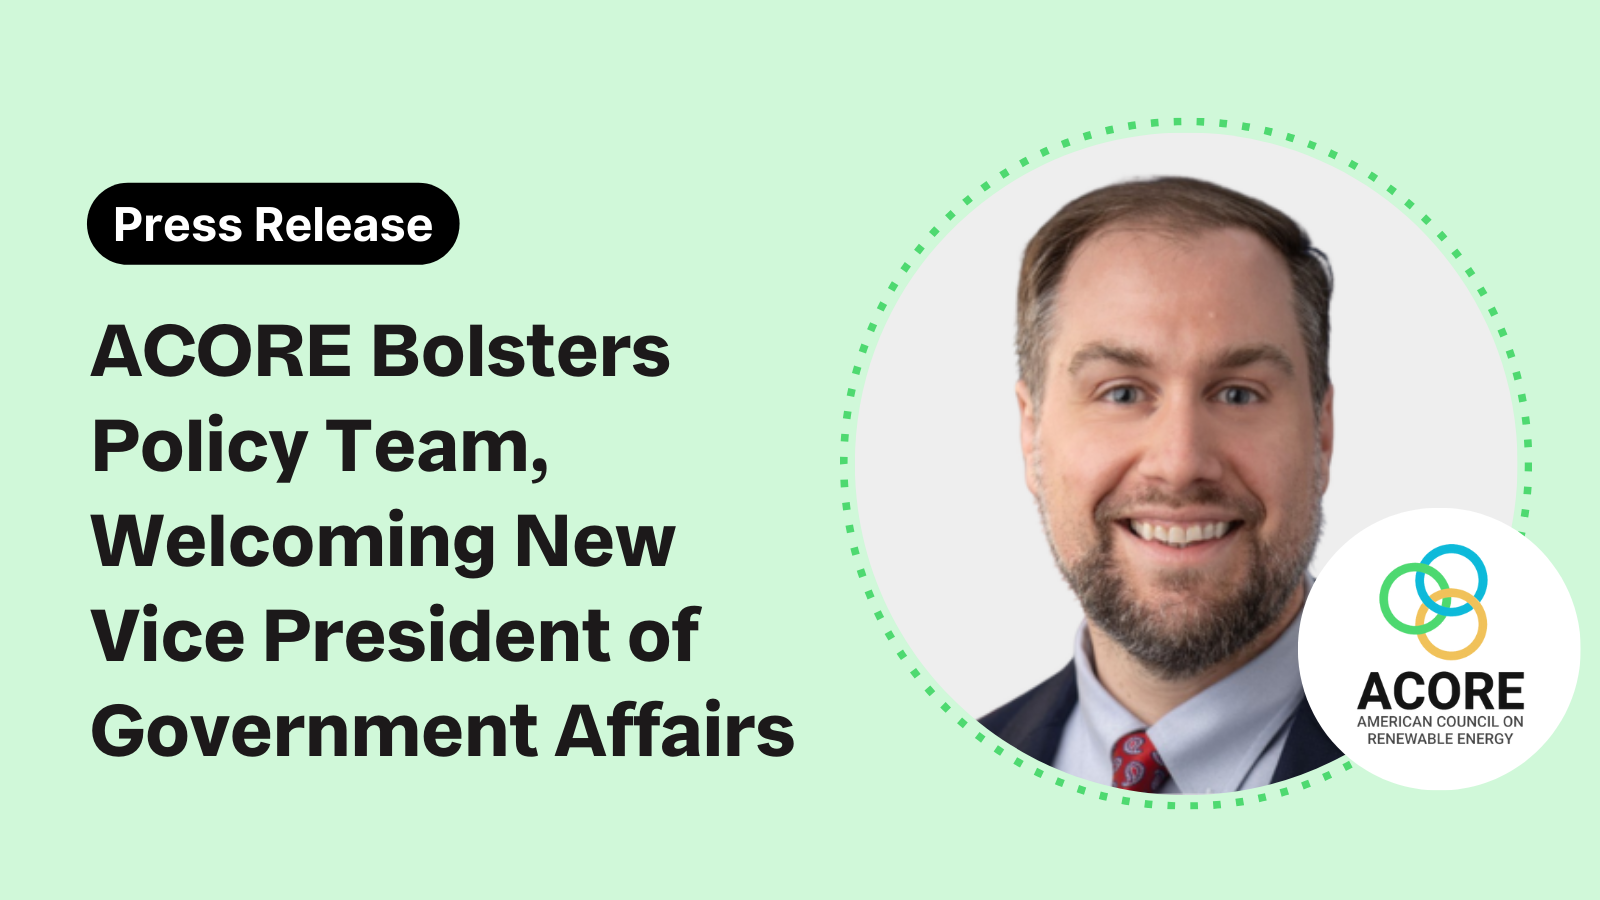 ACORE Bolsters Policy Team, Welcoming New Vice President of Government Affairs